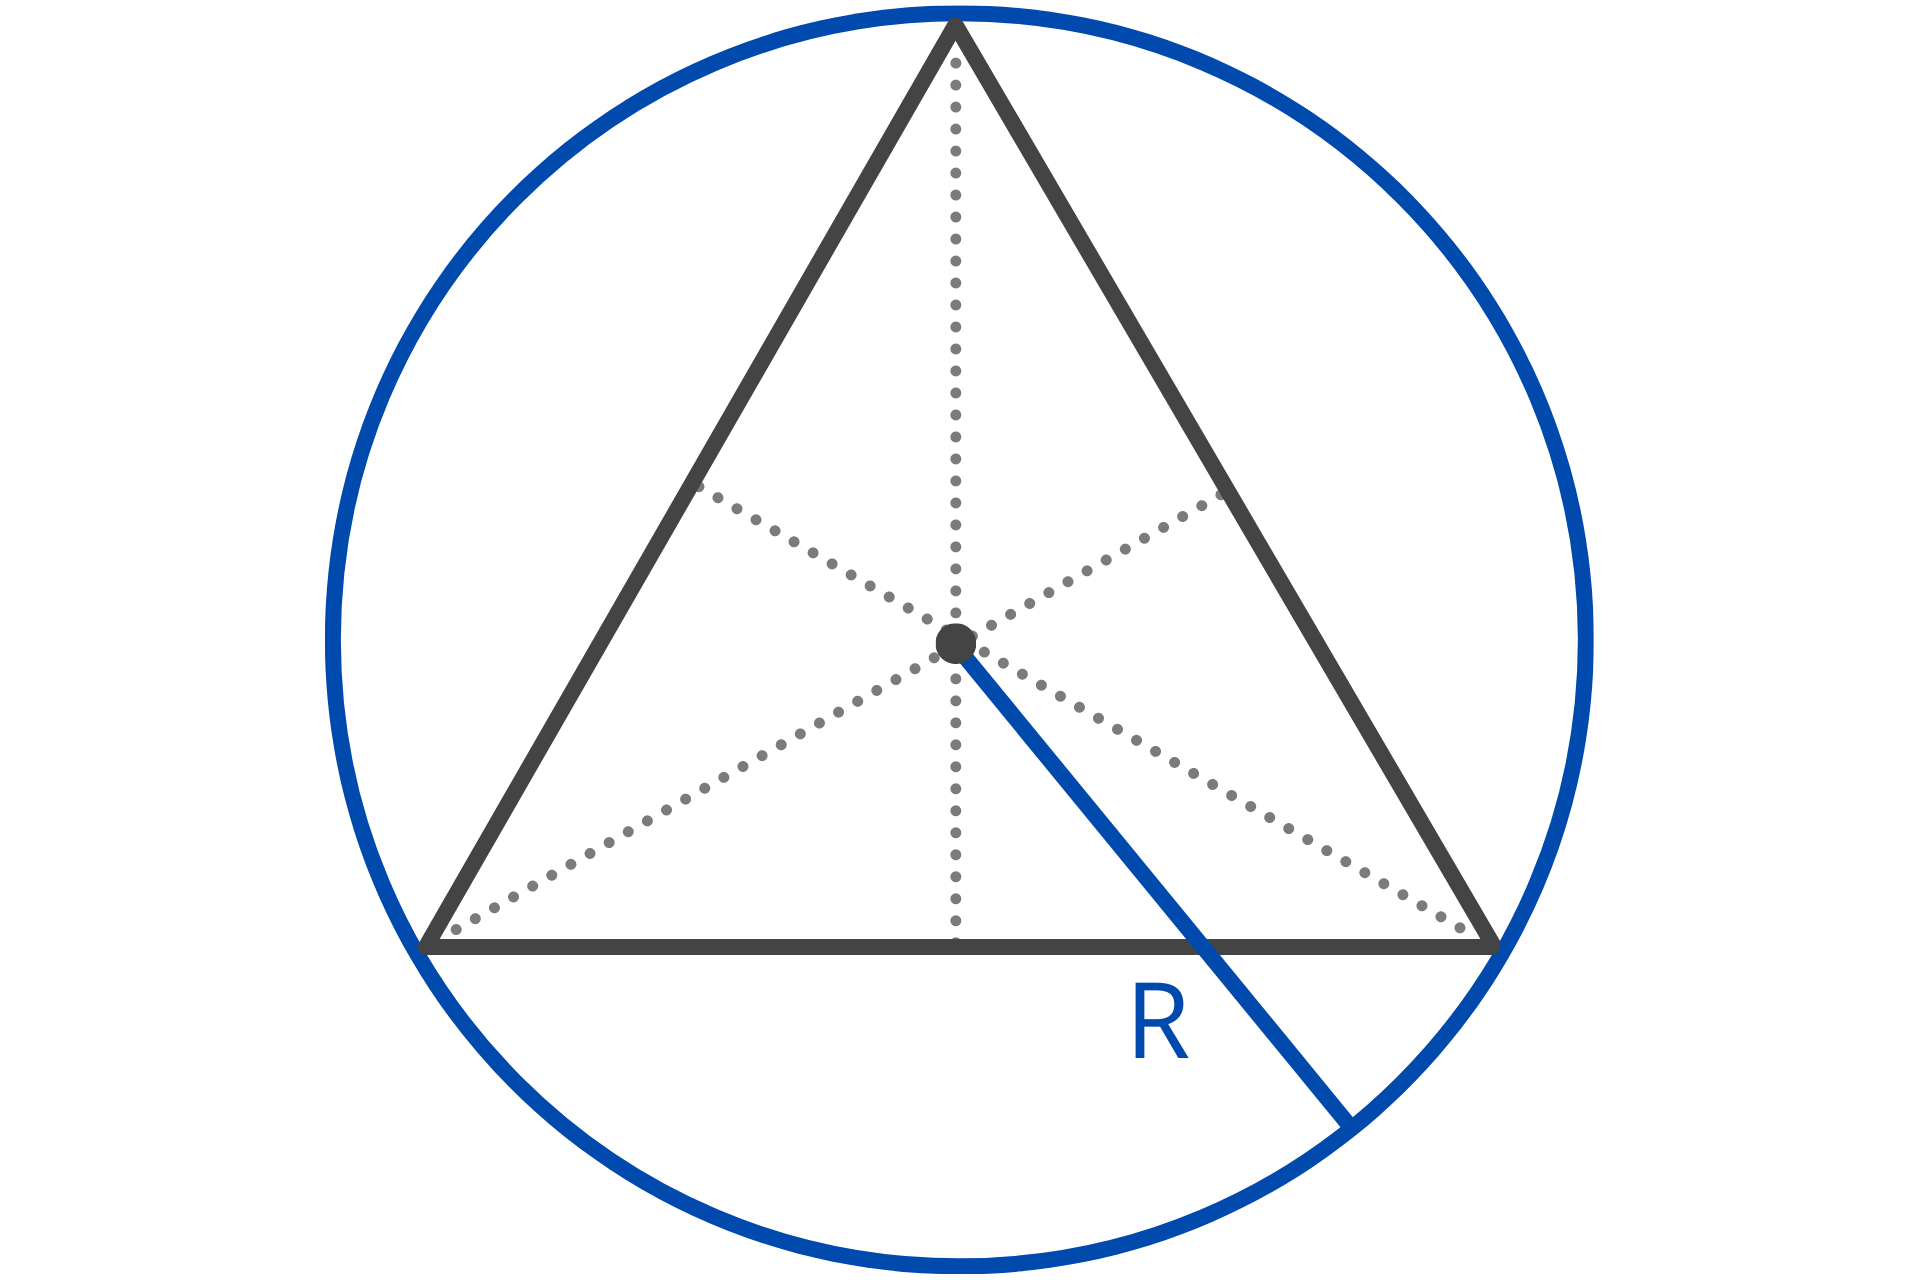 Graphic showing the circumscribed circle and circumradius for an equilateral triangle